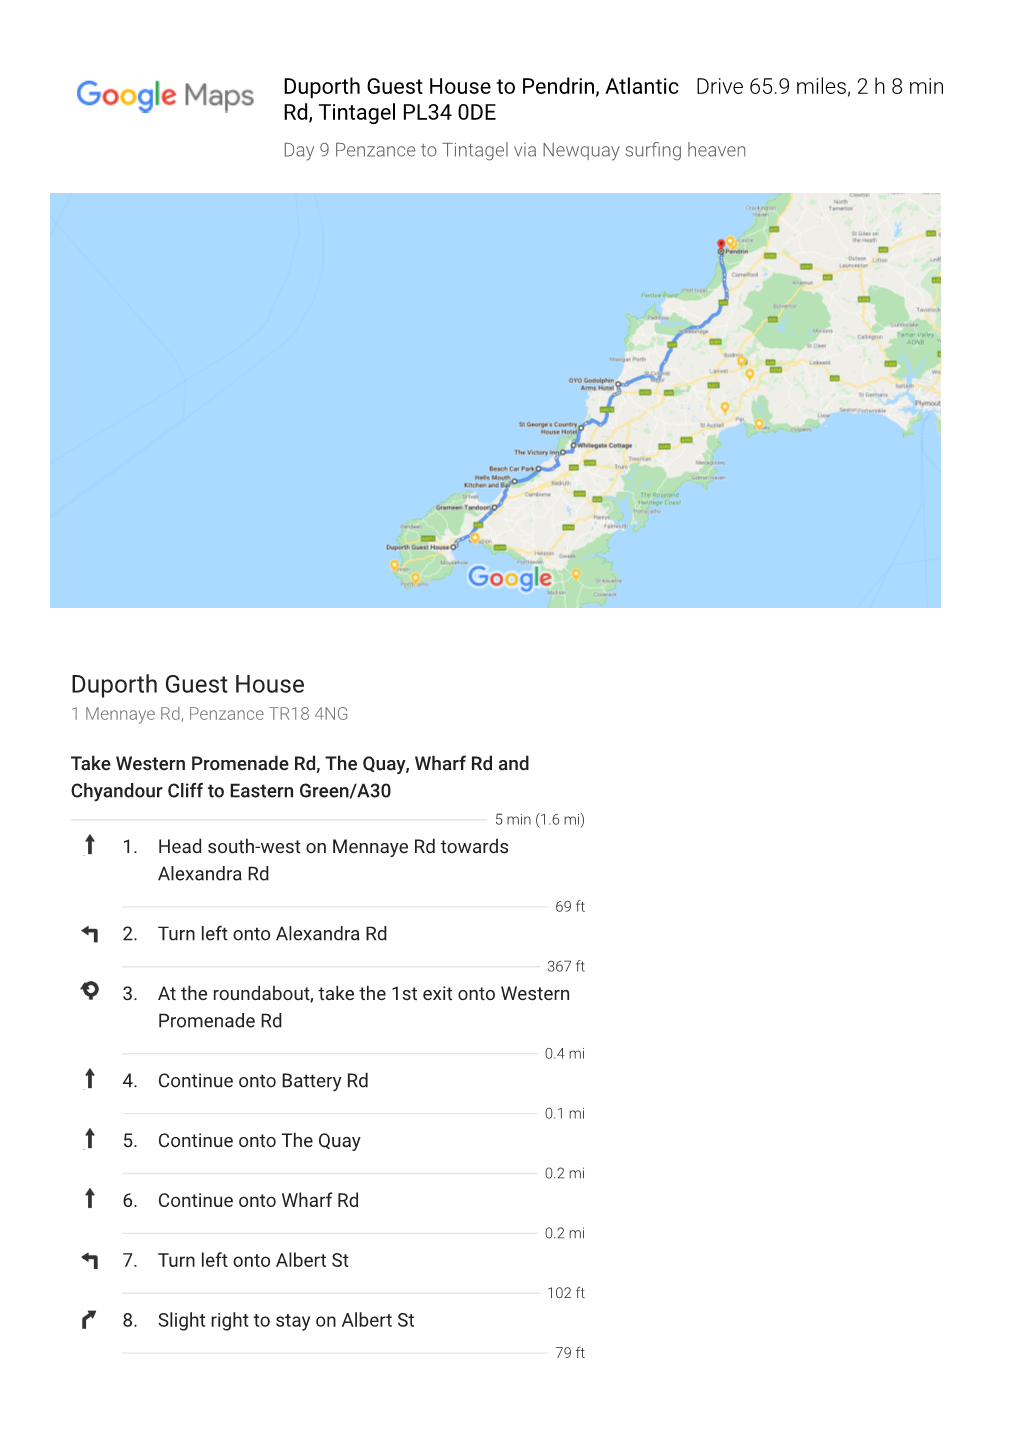 Duporth Guest House to Pendrin, Atlantic Rd, Tintagel PL34 0DE - Google Maps